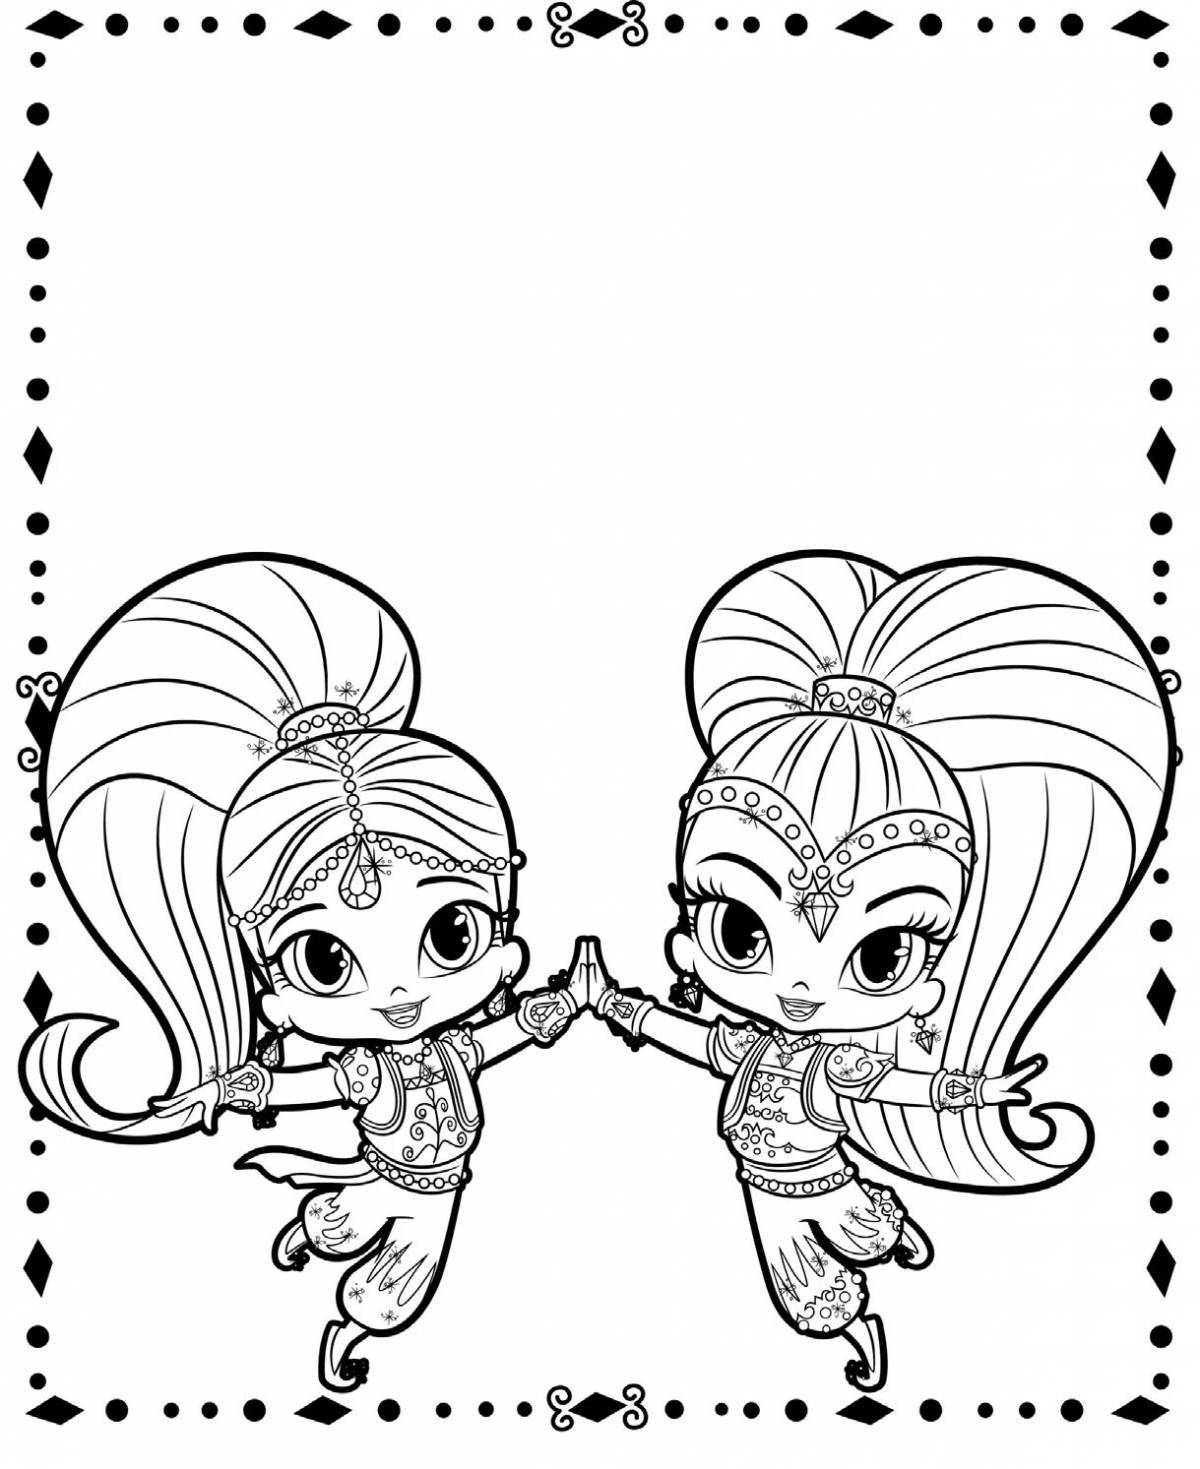 Shimmer and shine coloring book for children